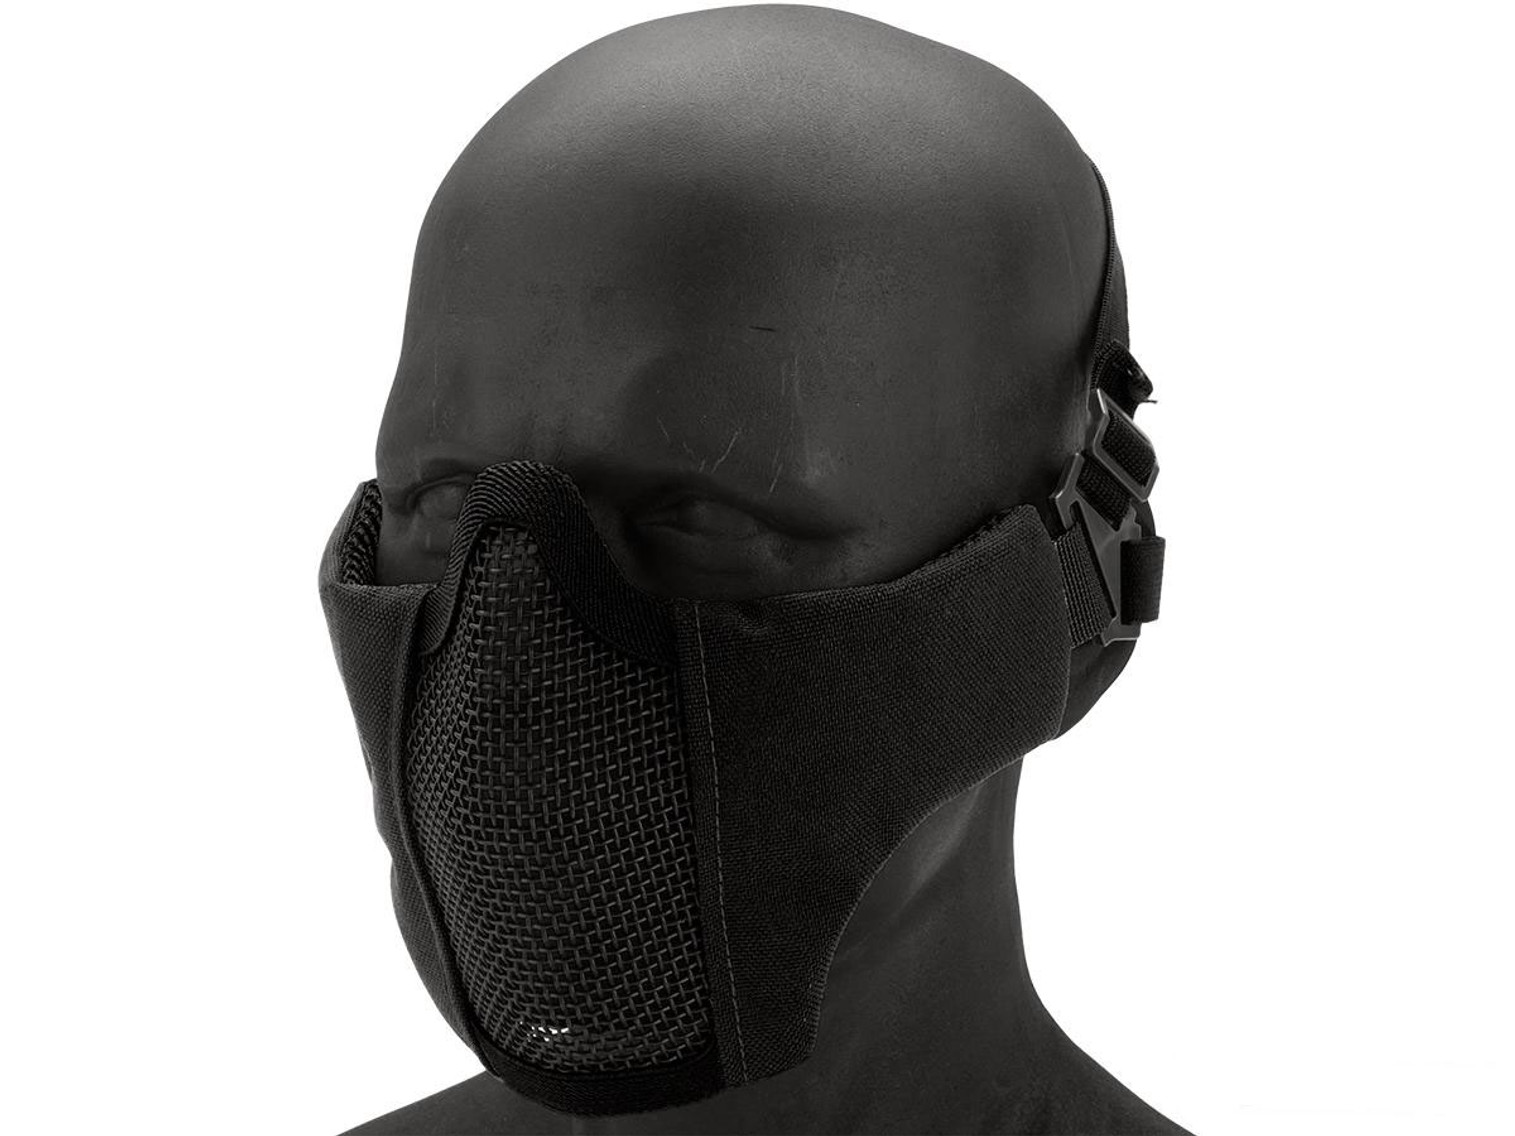 Matrix Low Profile Iron Face Padded Lower Half Face Mask (Color: Black)